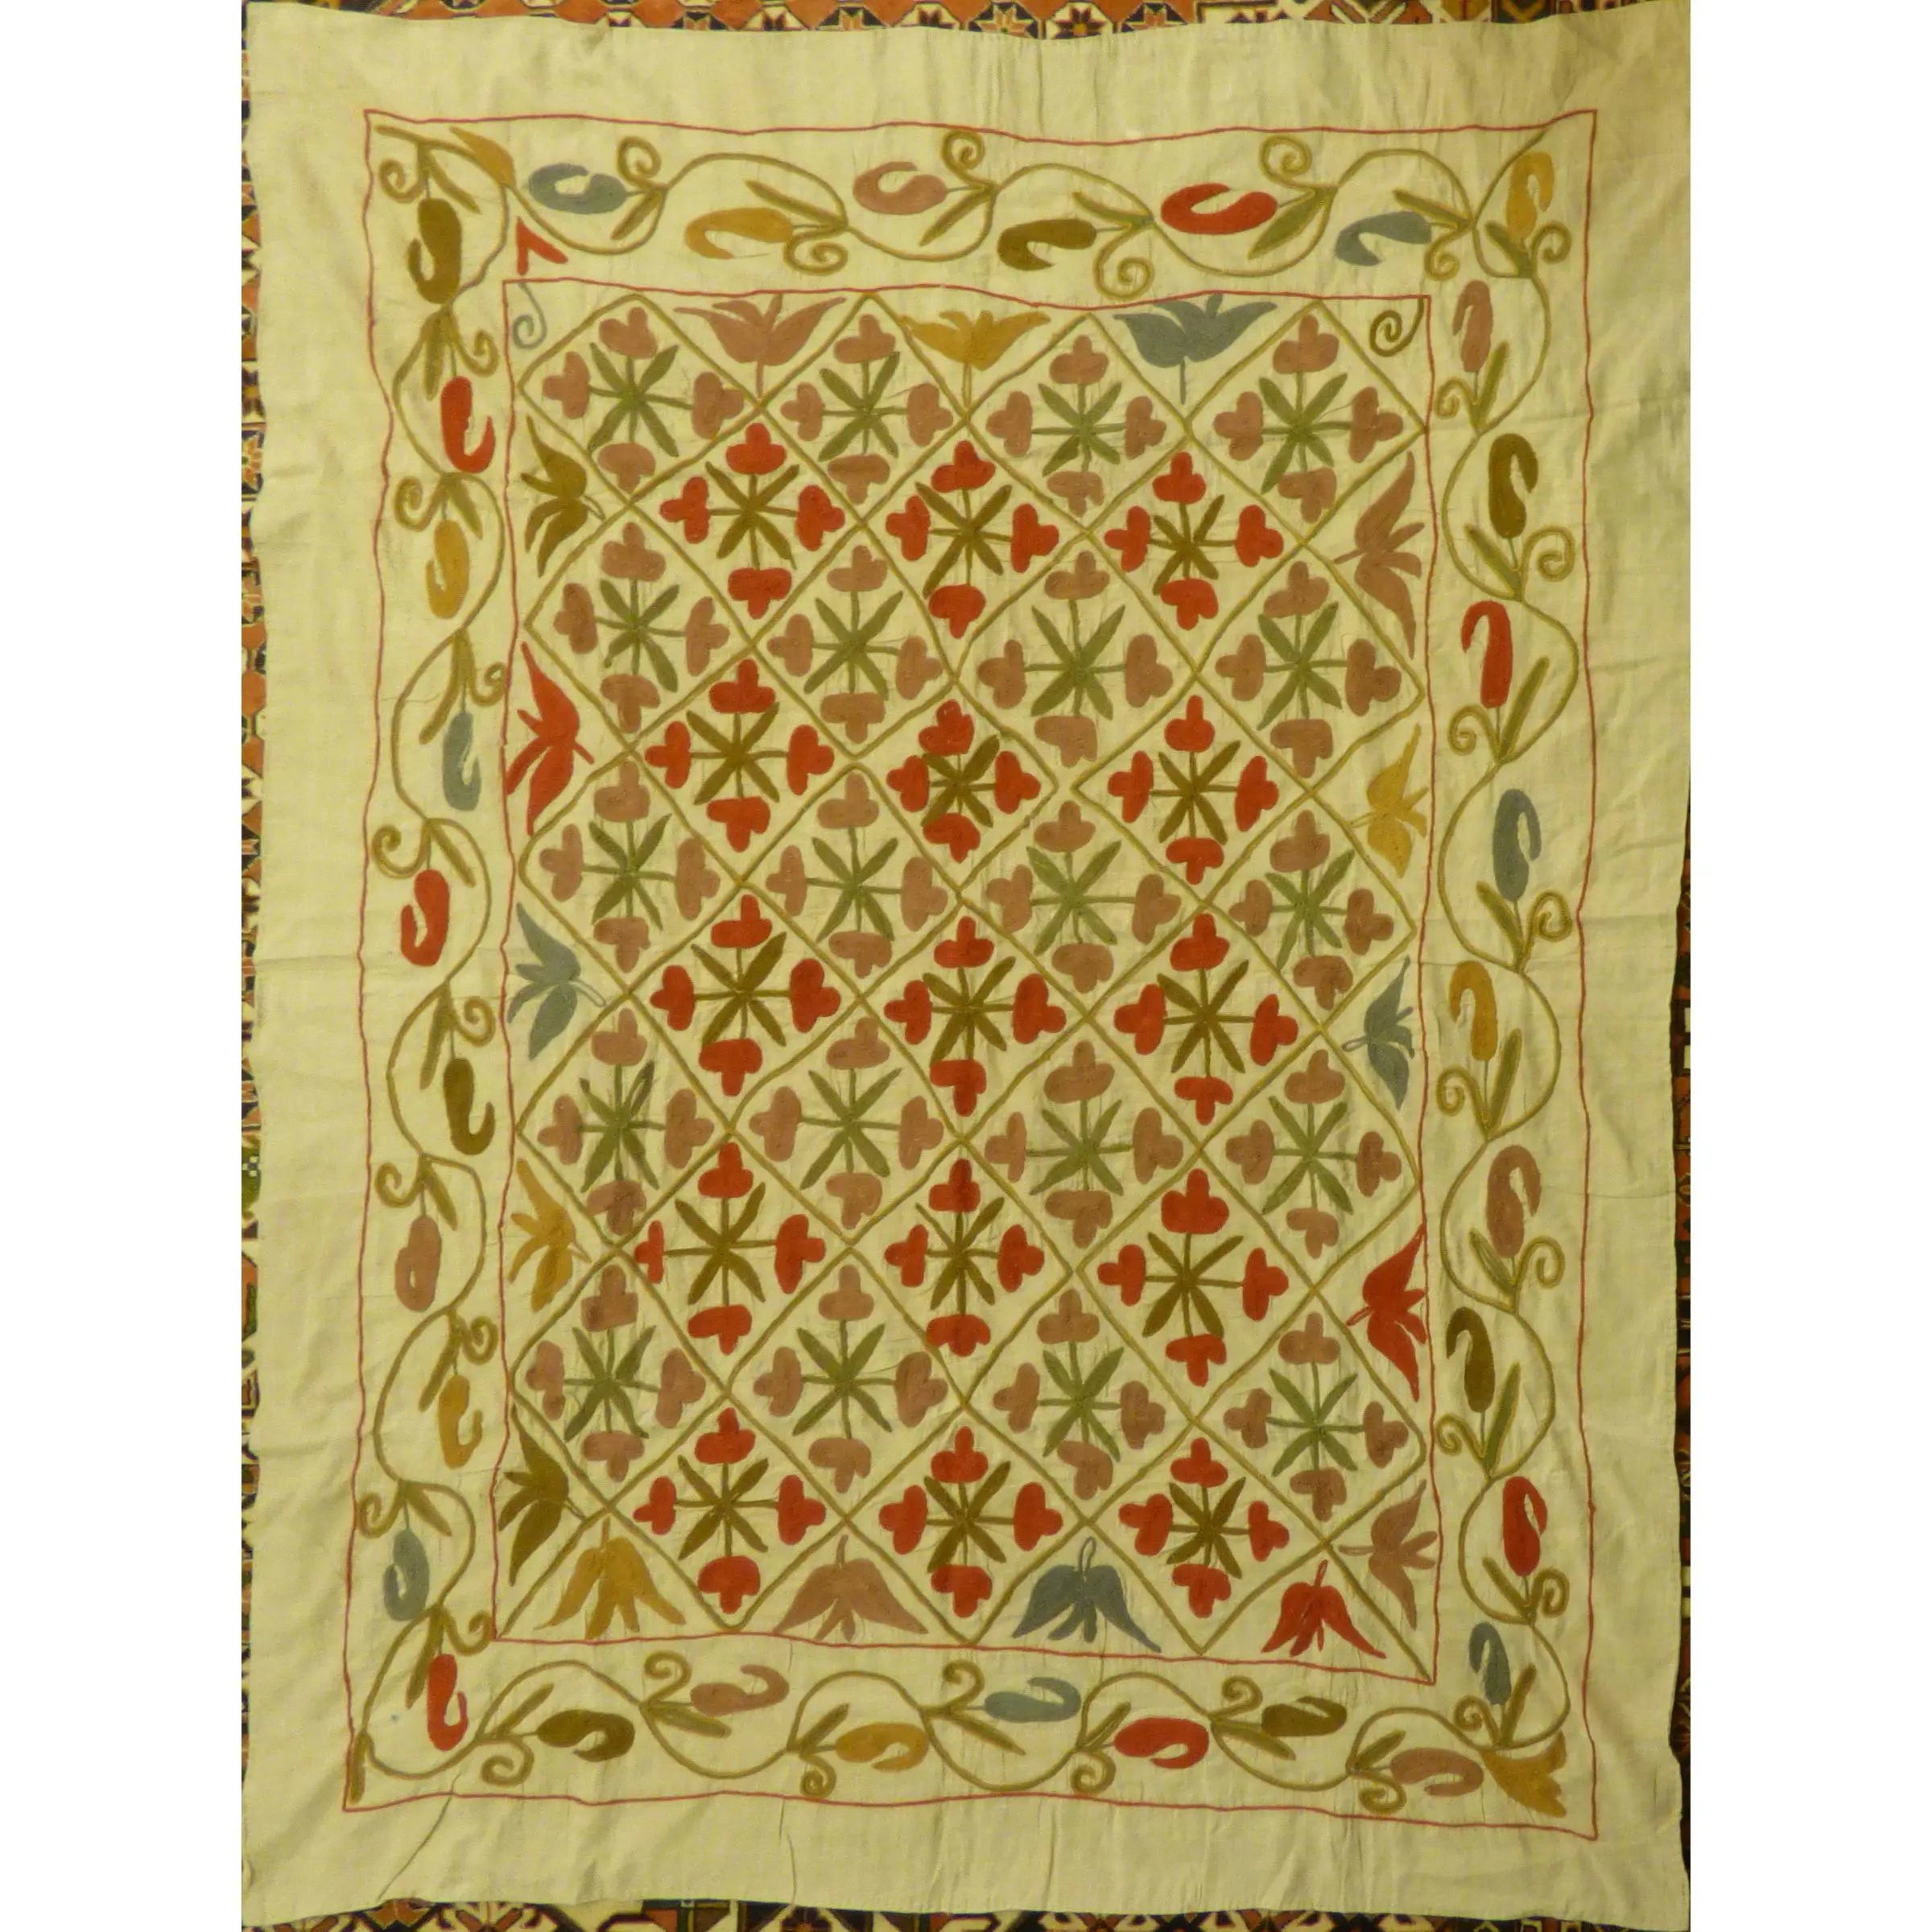 Fine Art Handmade Afghanistan Cotton Ready To Hang For Home Wall Art Decoration   69"  X  61" Panwd0002